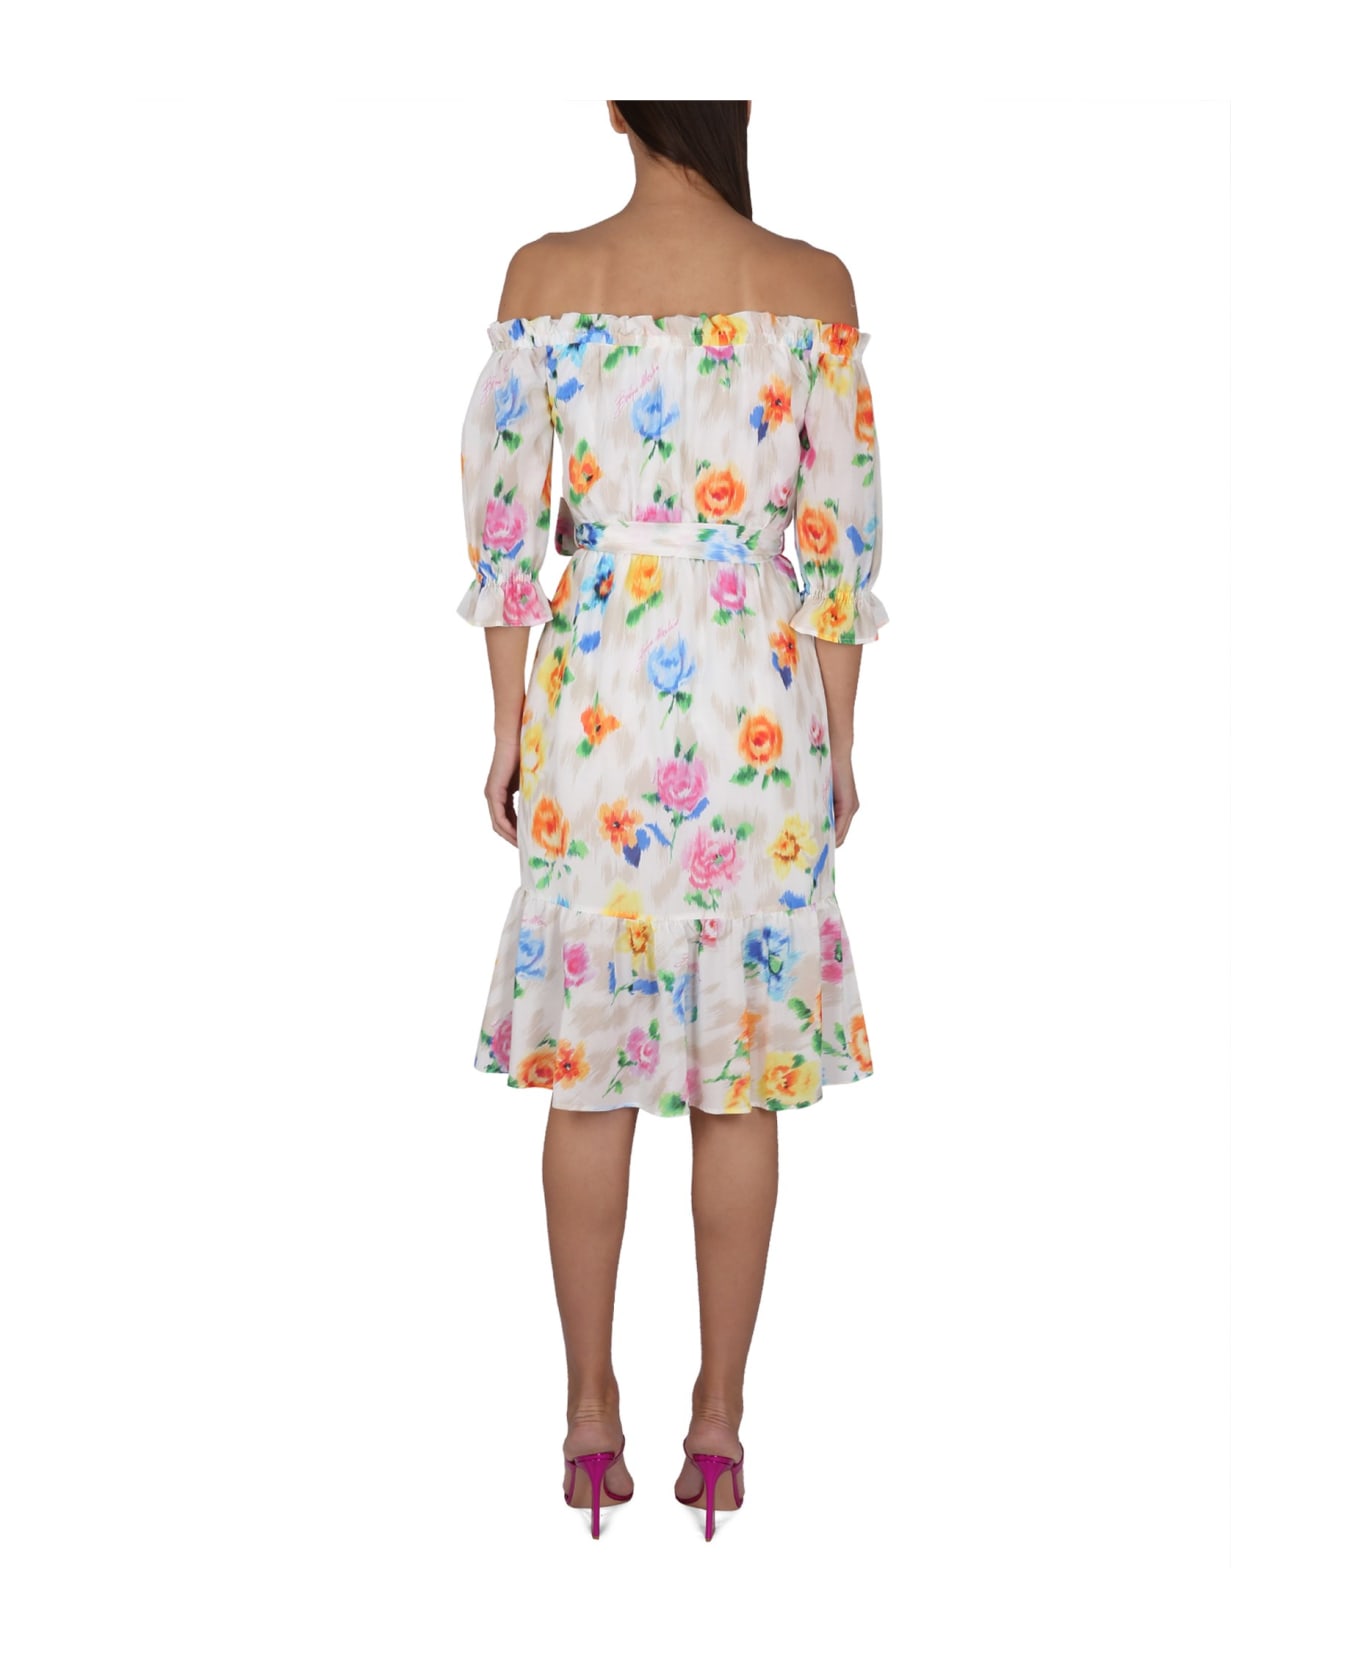 Boutique Moschino Dress With Floral Pattern - MULTICOLOR